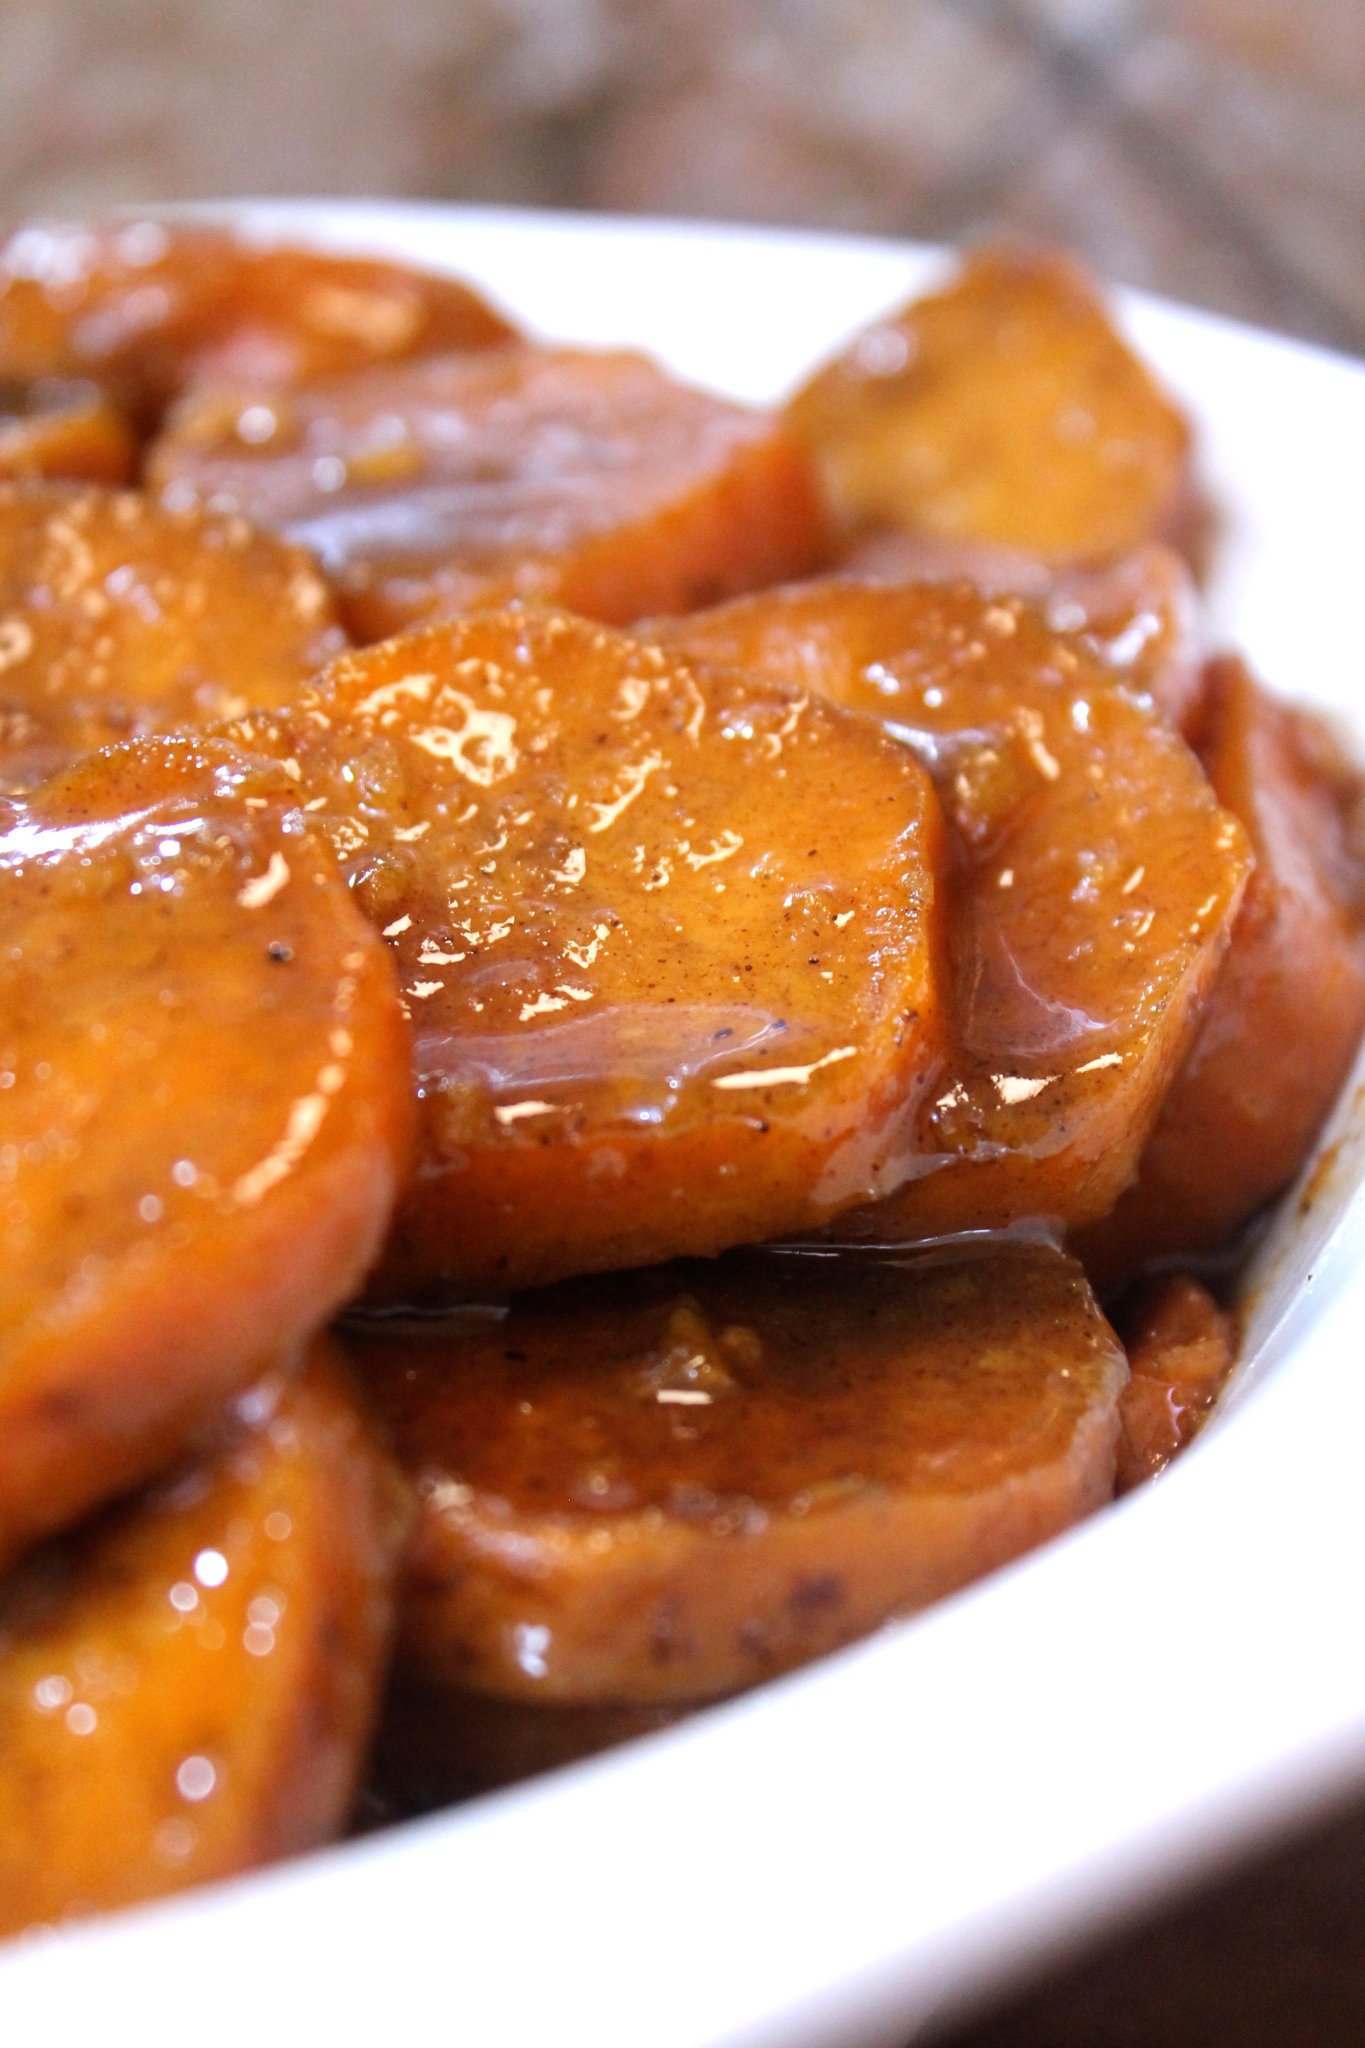 Baked Candied Yams - Soul Food Style! | I Heart Recipes